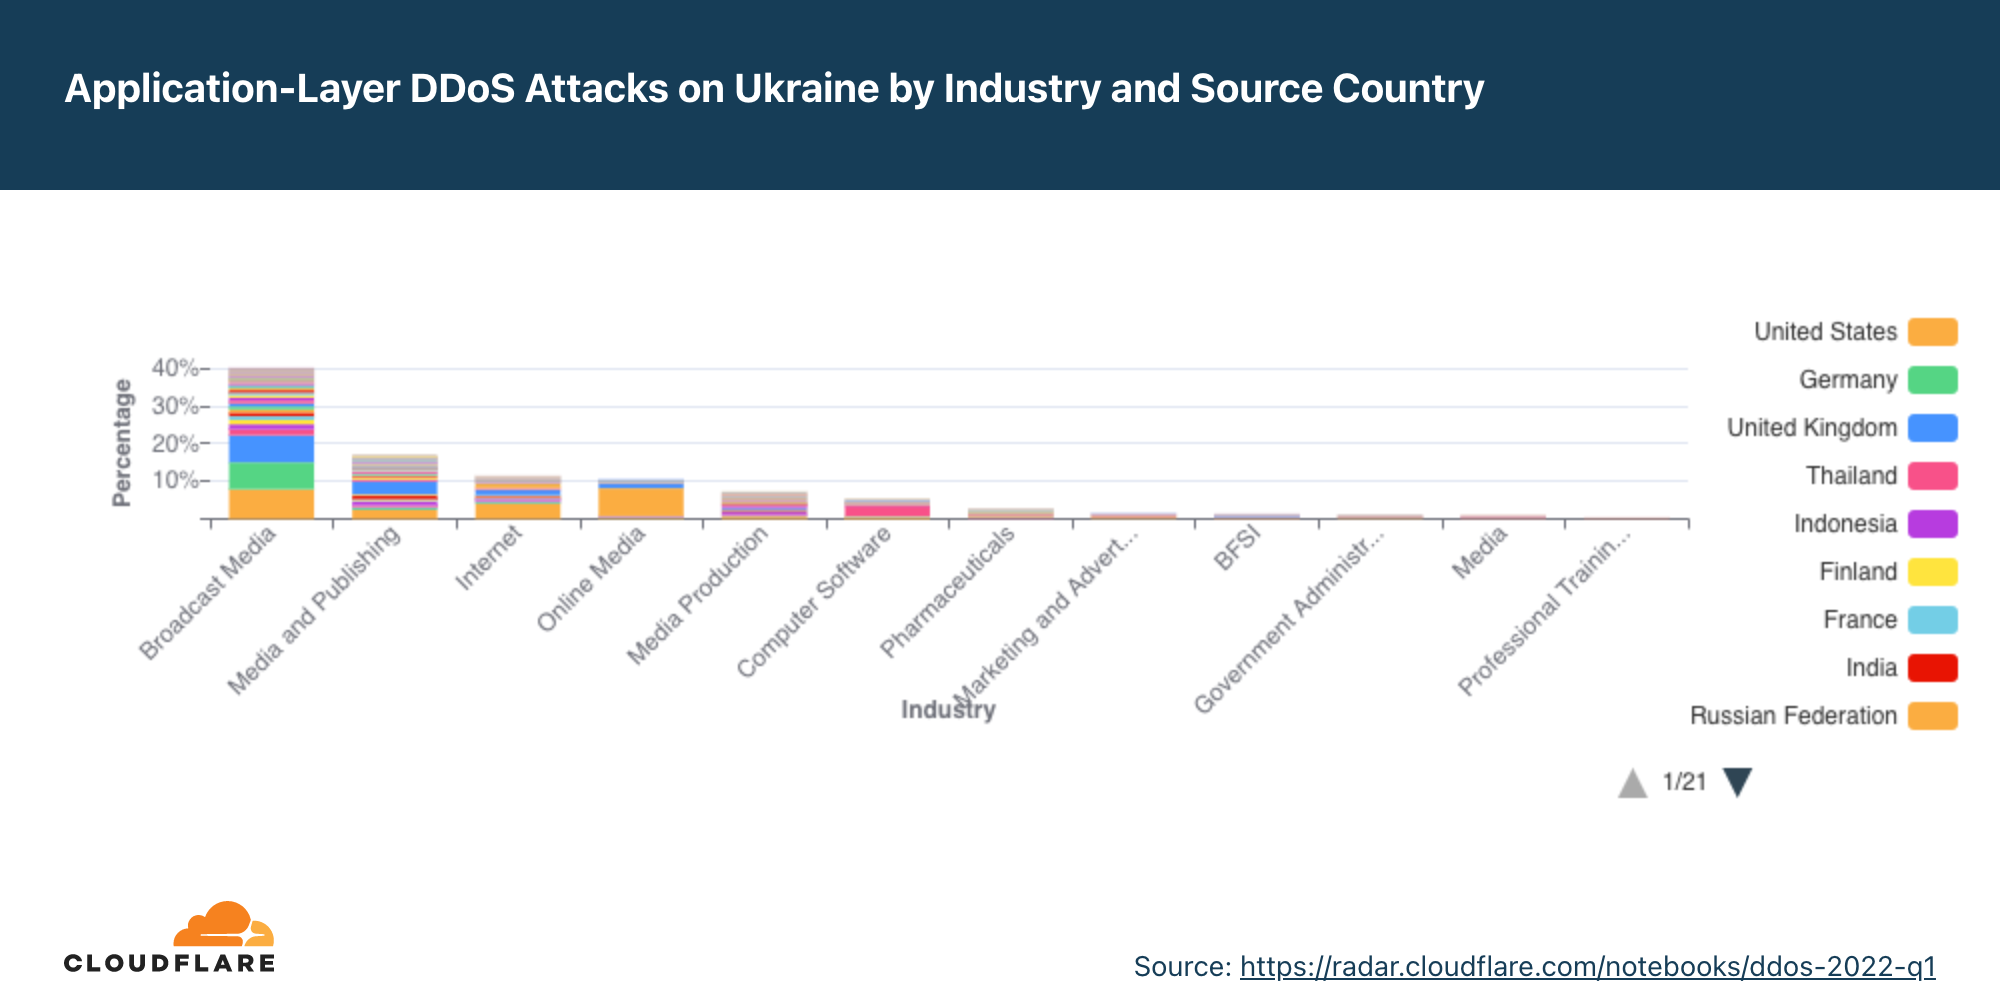 Graph of the distribution of HTTP DDoS attacks on Ukrainian industries by source country in 2022 Q1